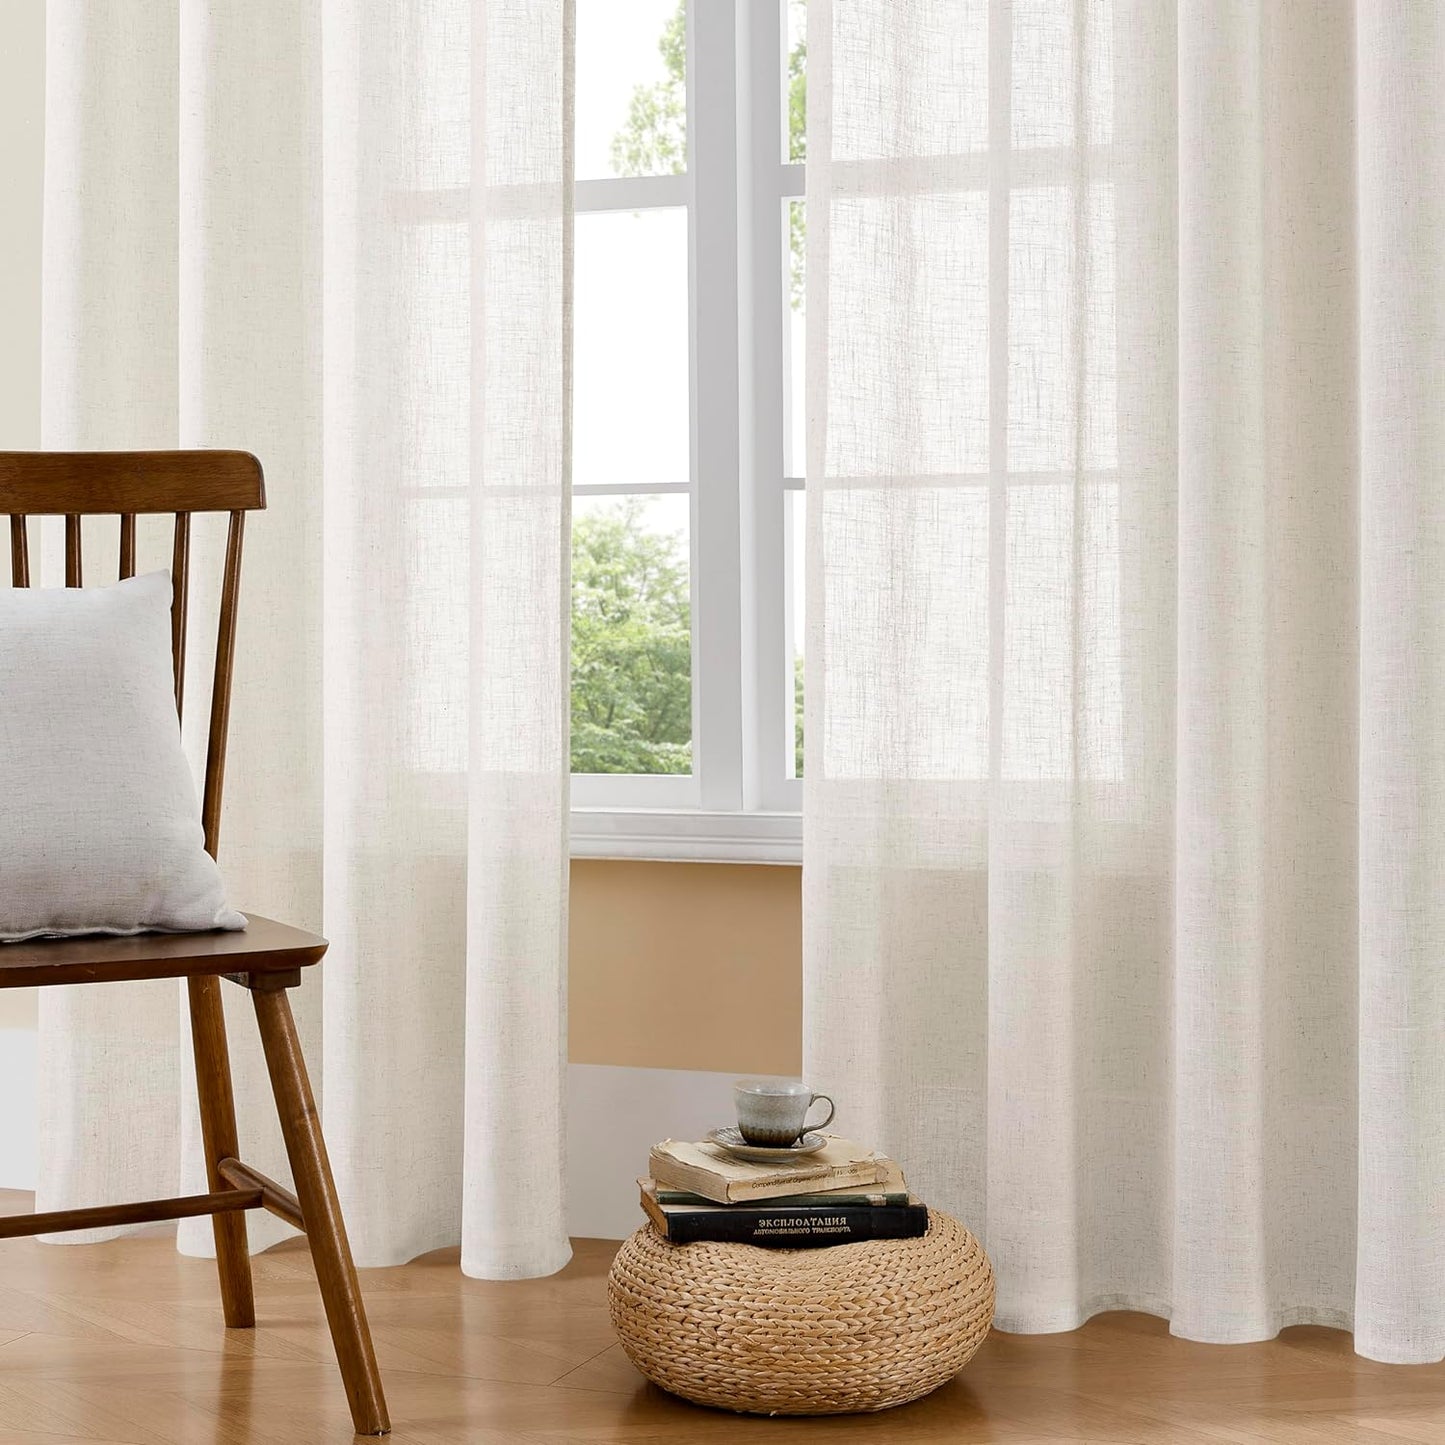 Joydeco Linen Curtains for Living Room,Semi-Sheer Curtains 108 Inches Long,Living Room Curtains 2 Panel Sets,White Curtains Pinch Pleated Curtains & Drapes(W52 X L108 Inch, Off-White)  Joydeco Off-White 52W X 84L Inch X 2 Panels 